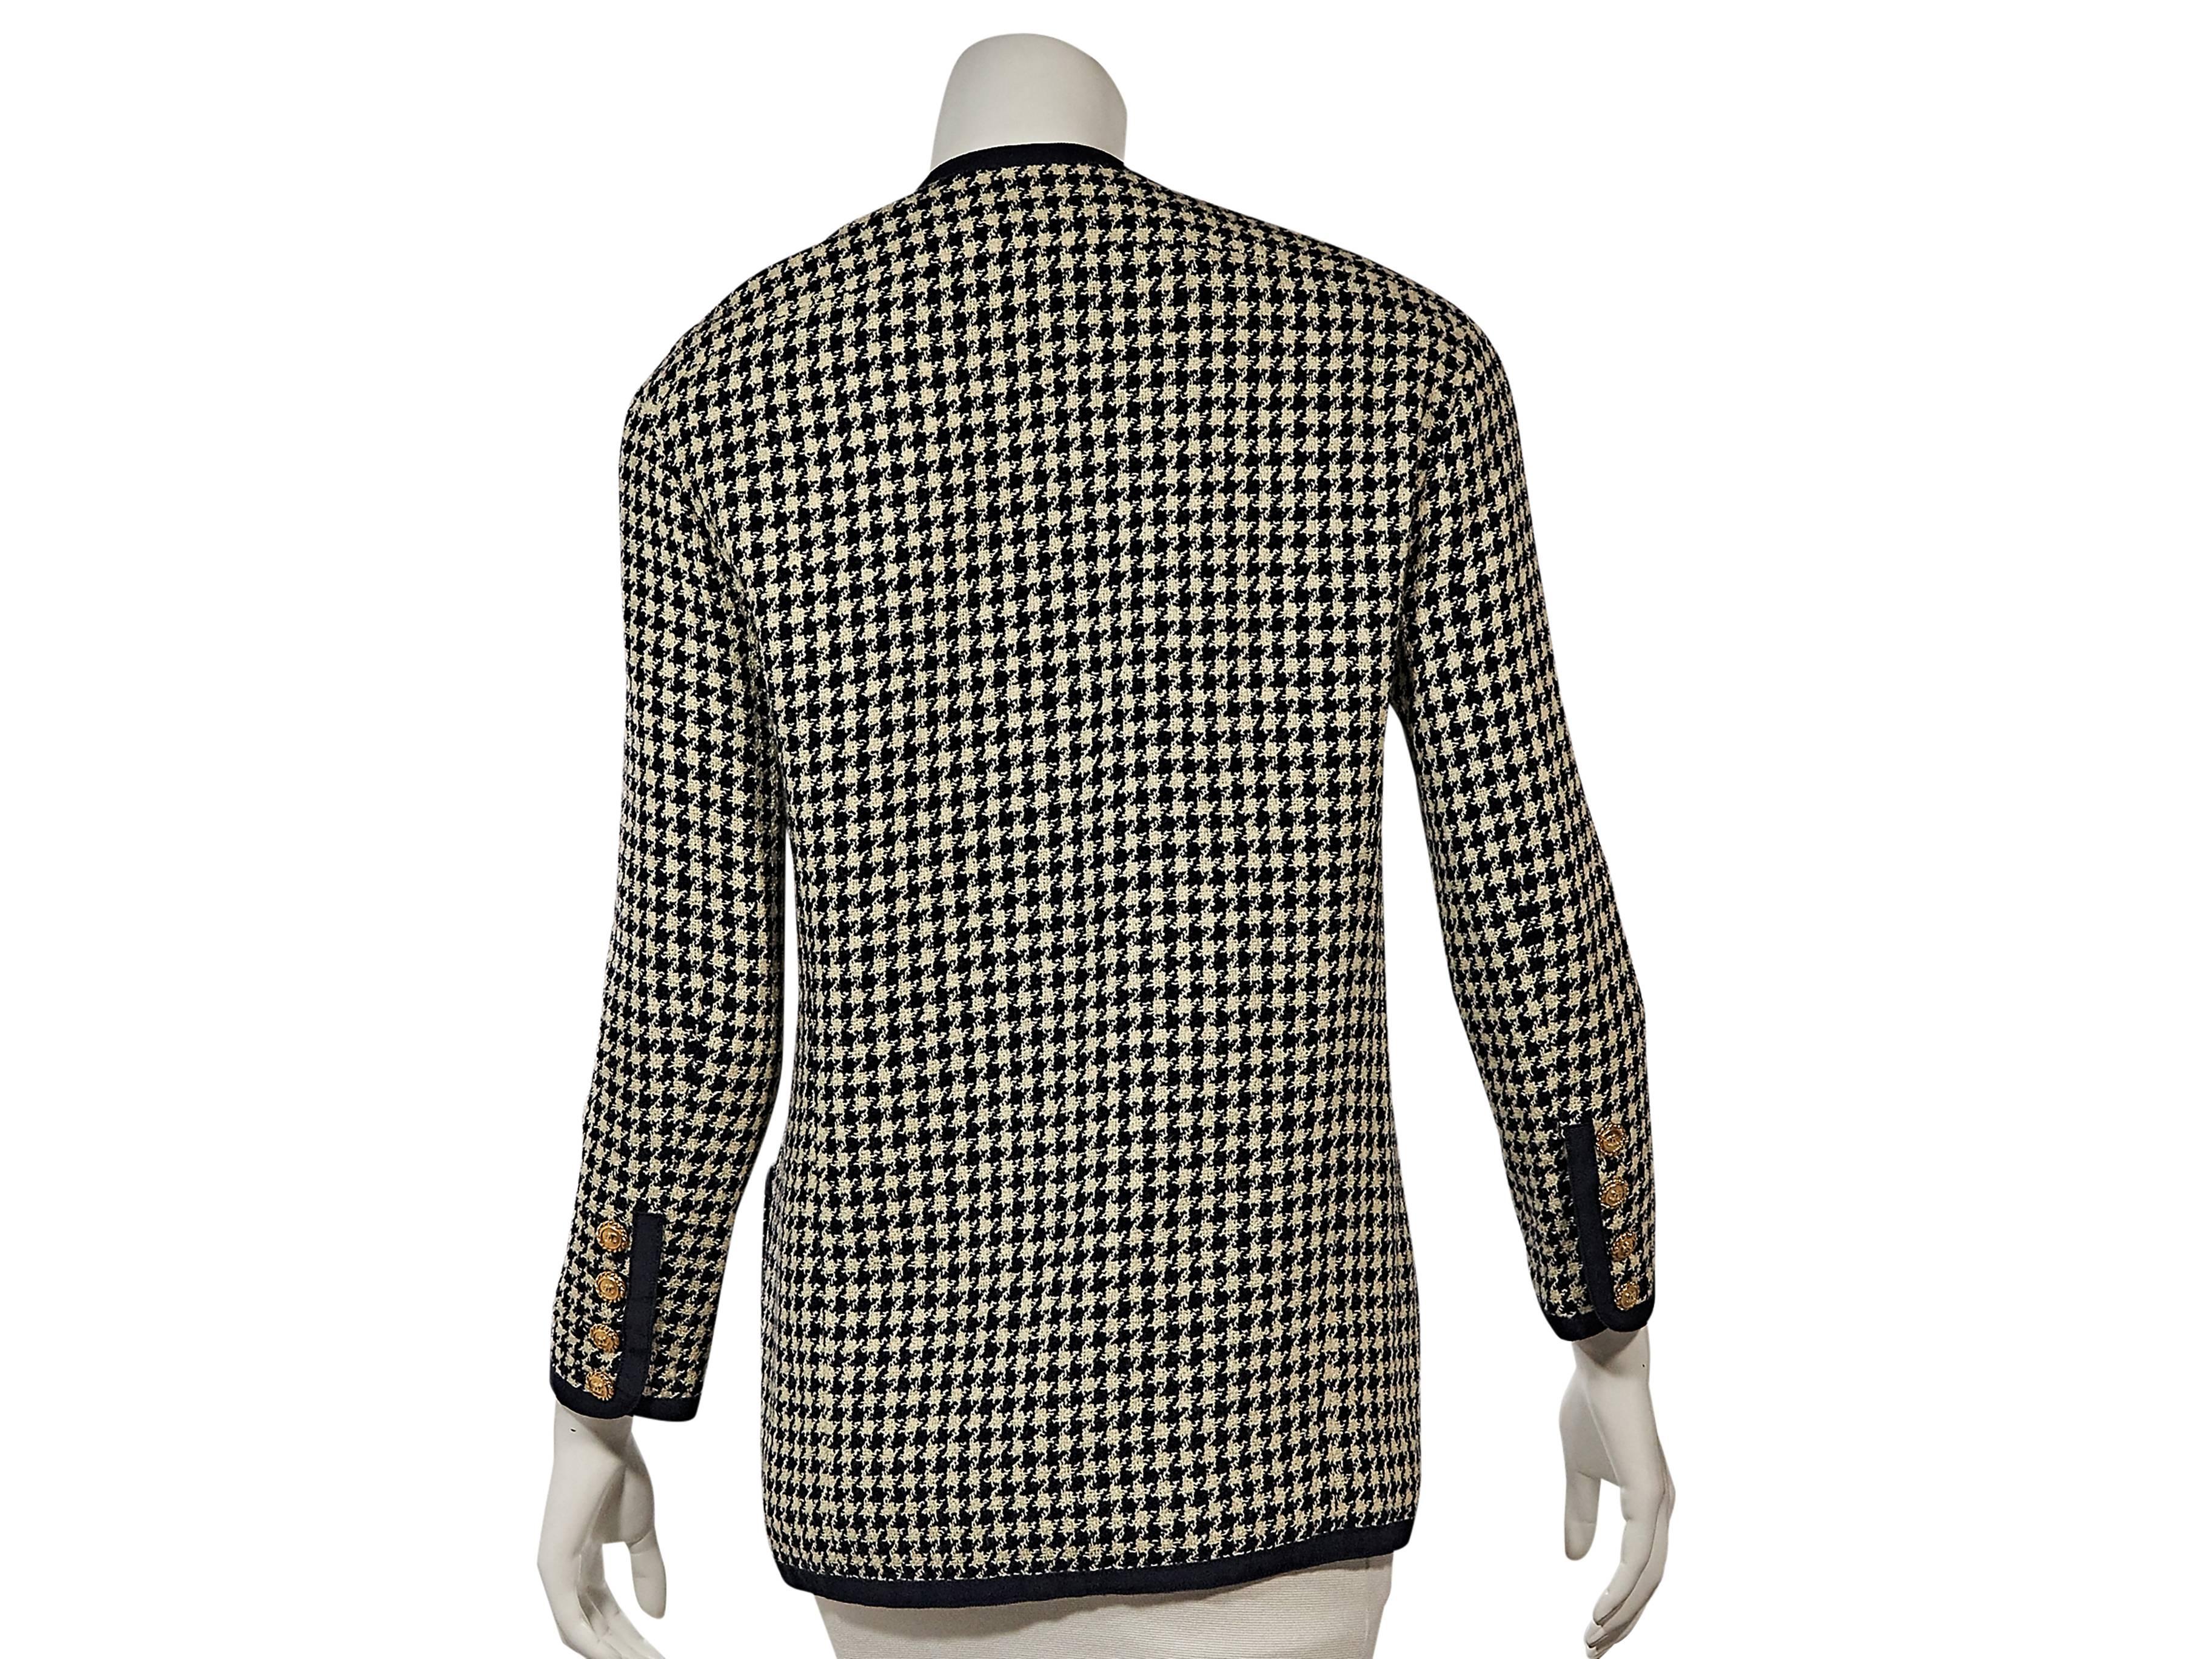 Product details: Vintage blue houndstooth jacket by Chanel. V-neck. Bracelet-length sleeves. Four-button detail at cuffs. Concealed front closure. Besom button-front pockets. 
Condition: Very good. 